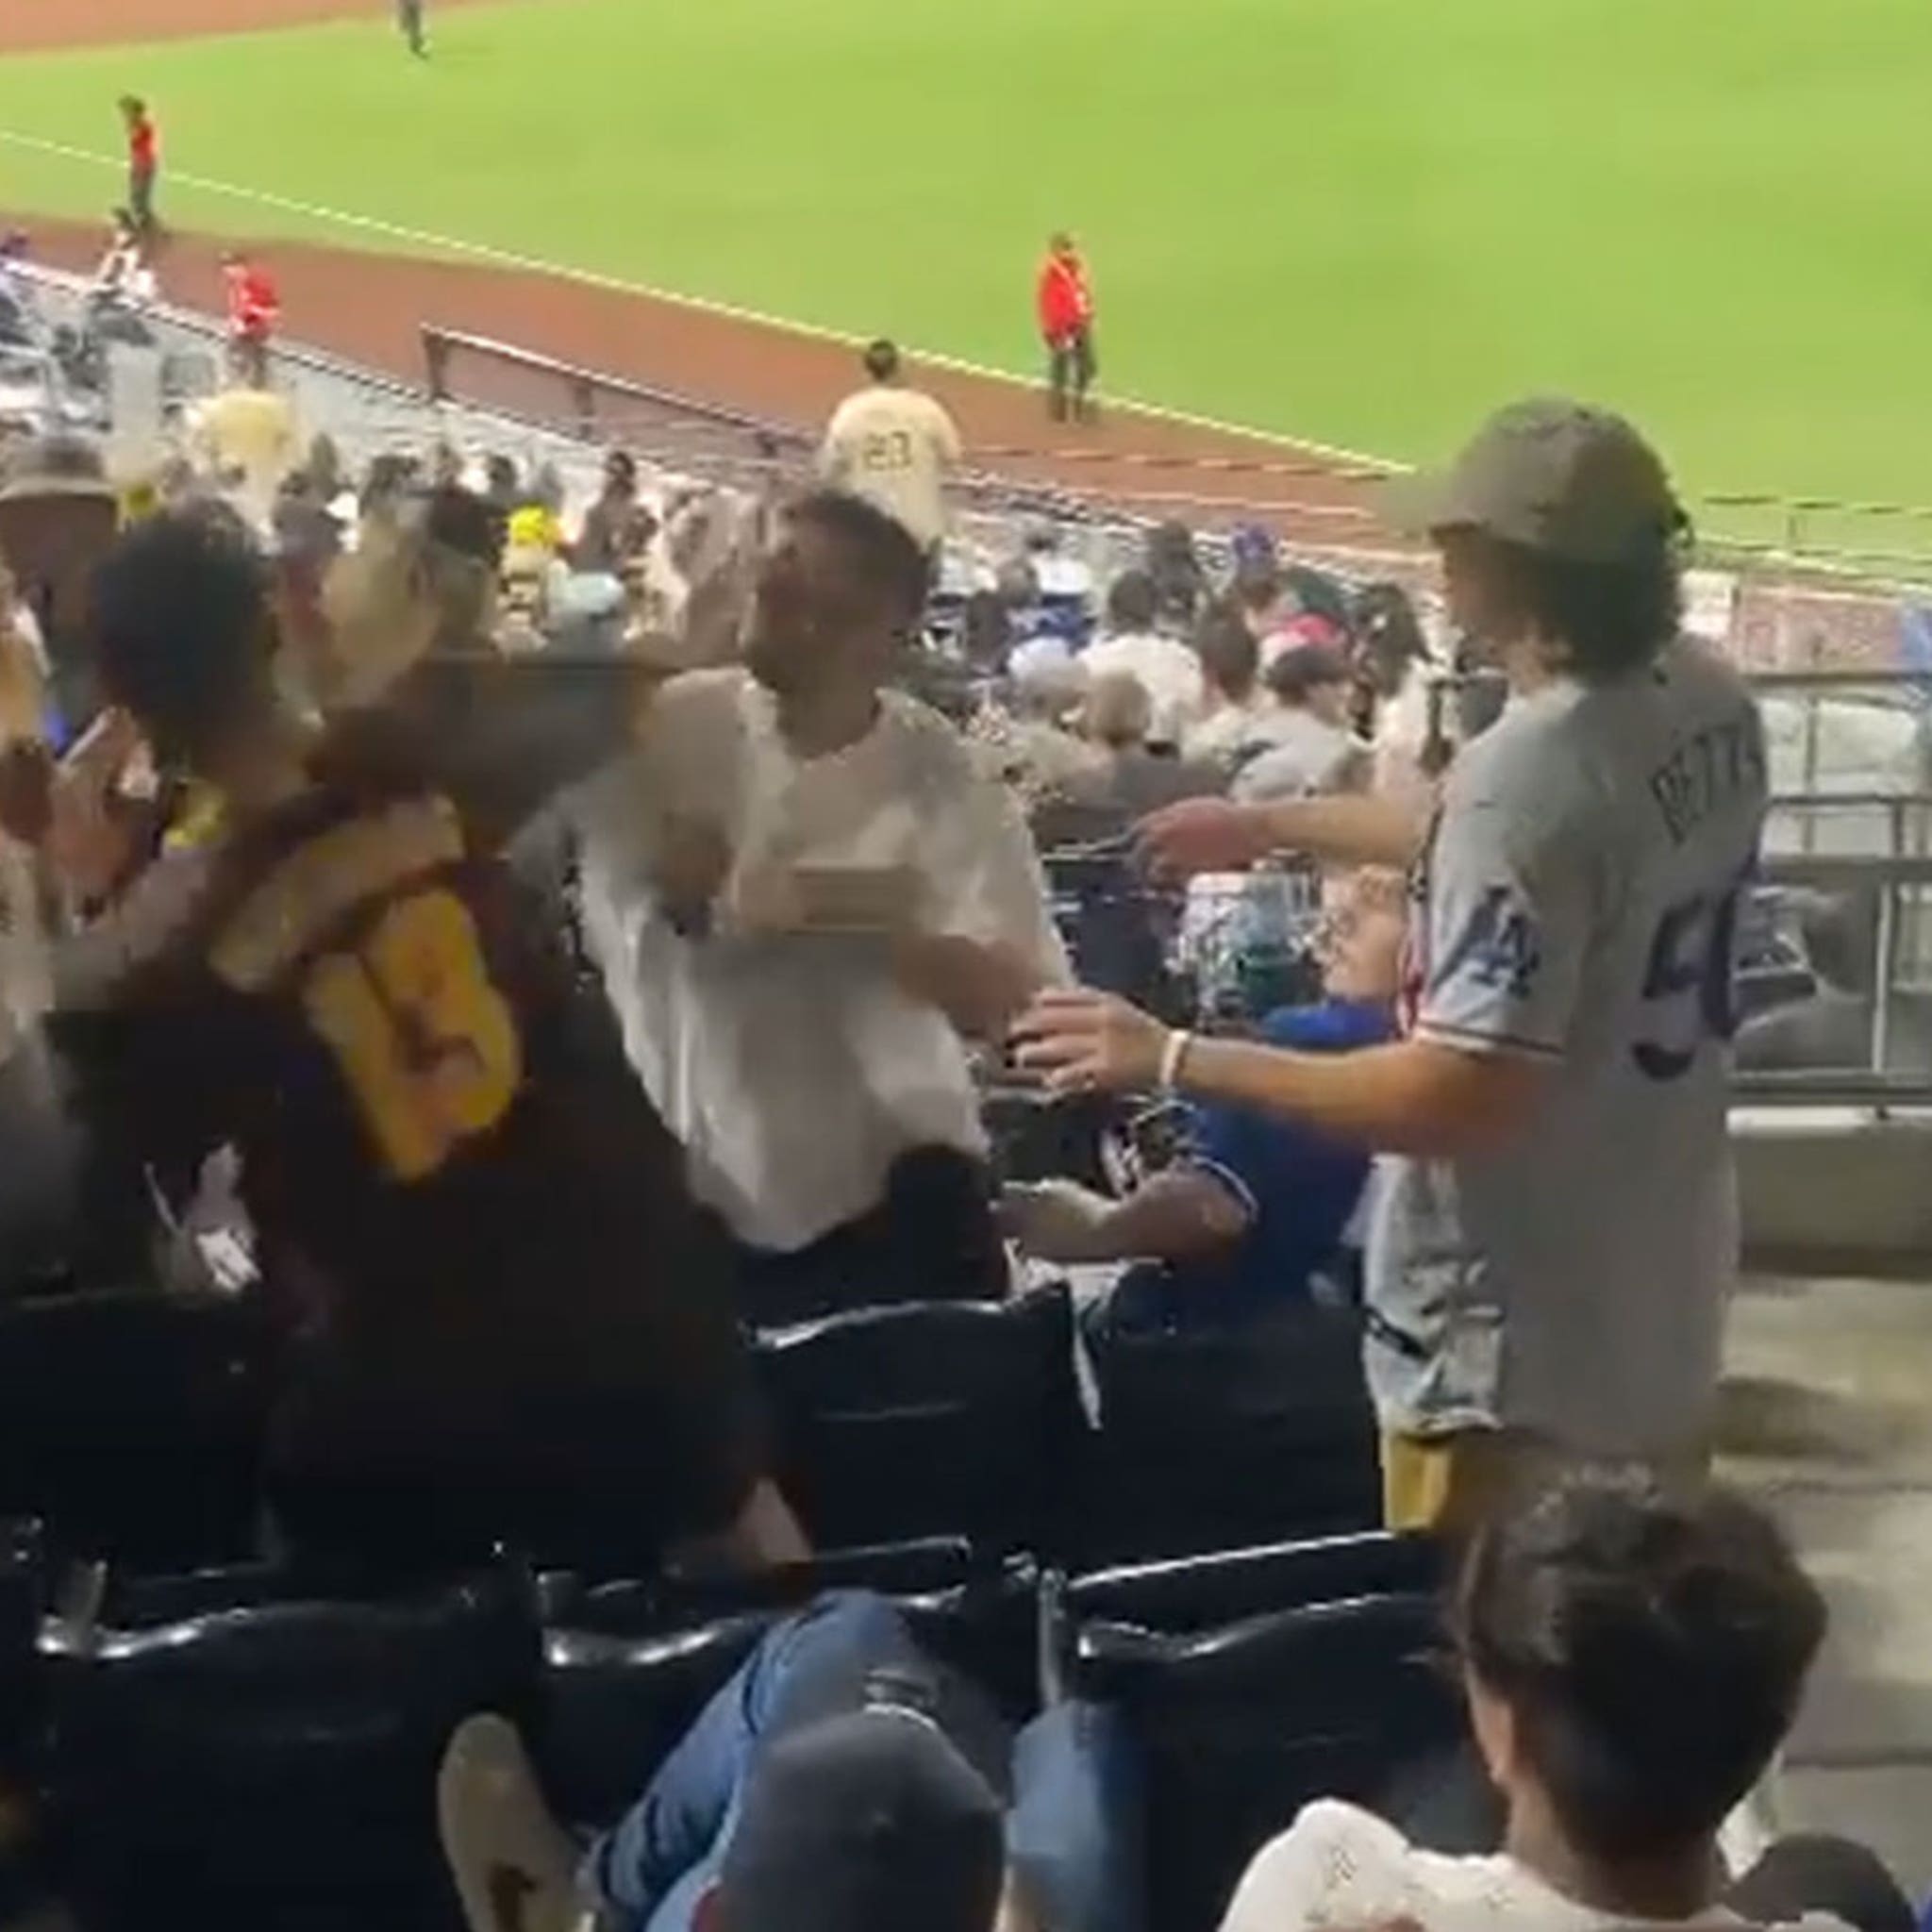 Sports World Reacts To Wild Fight Outside Dodgers Game - The Spun